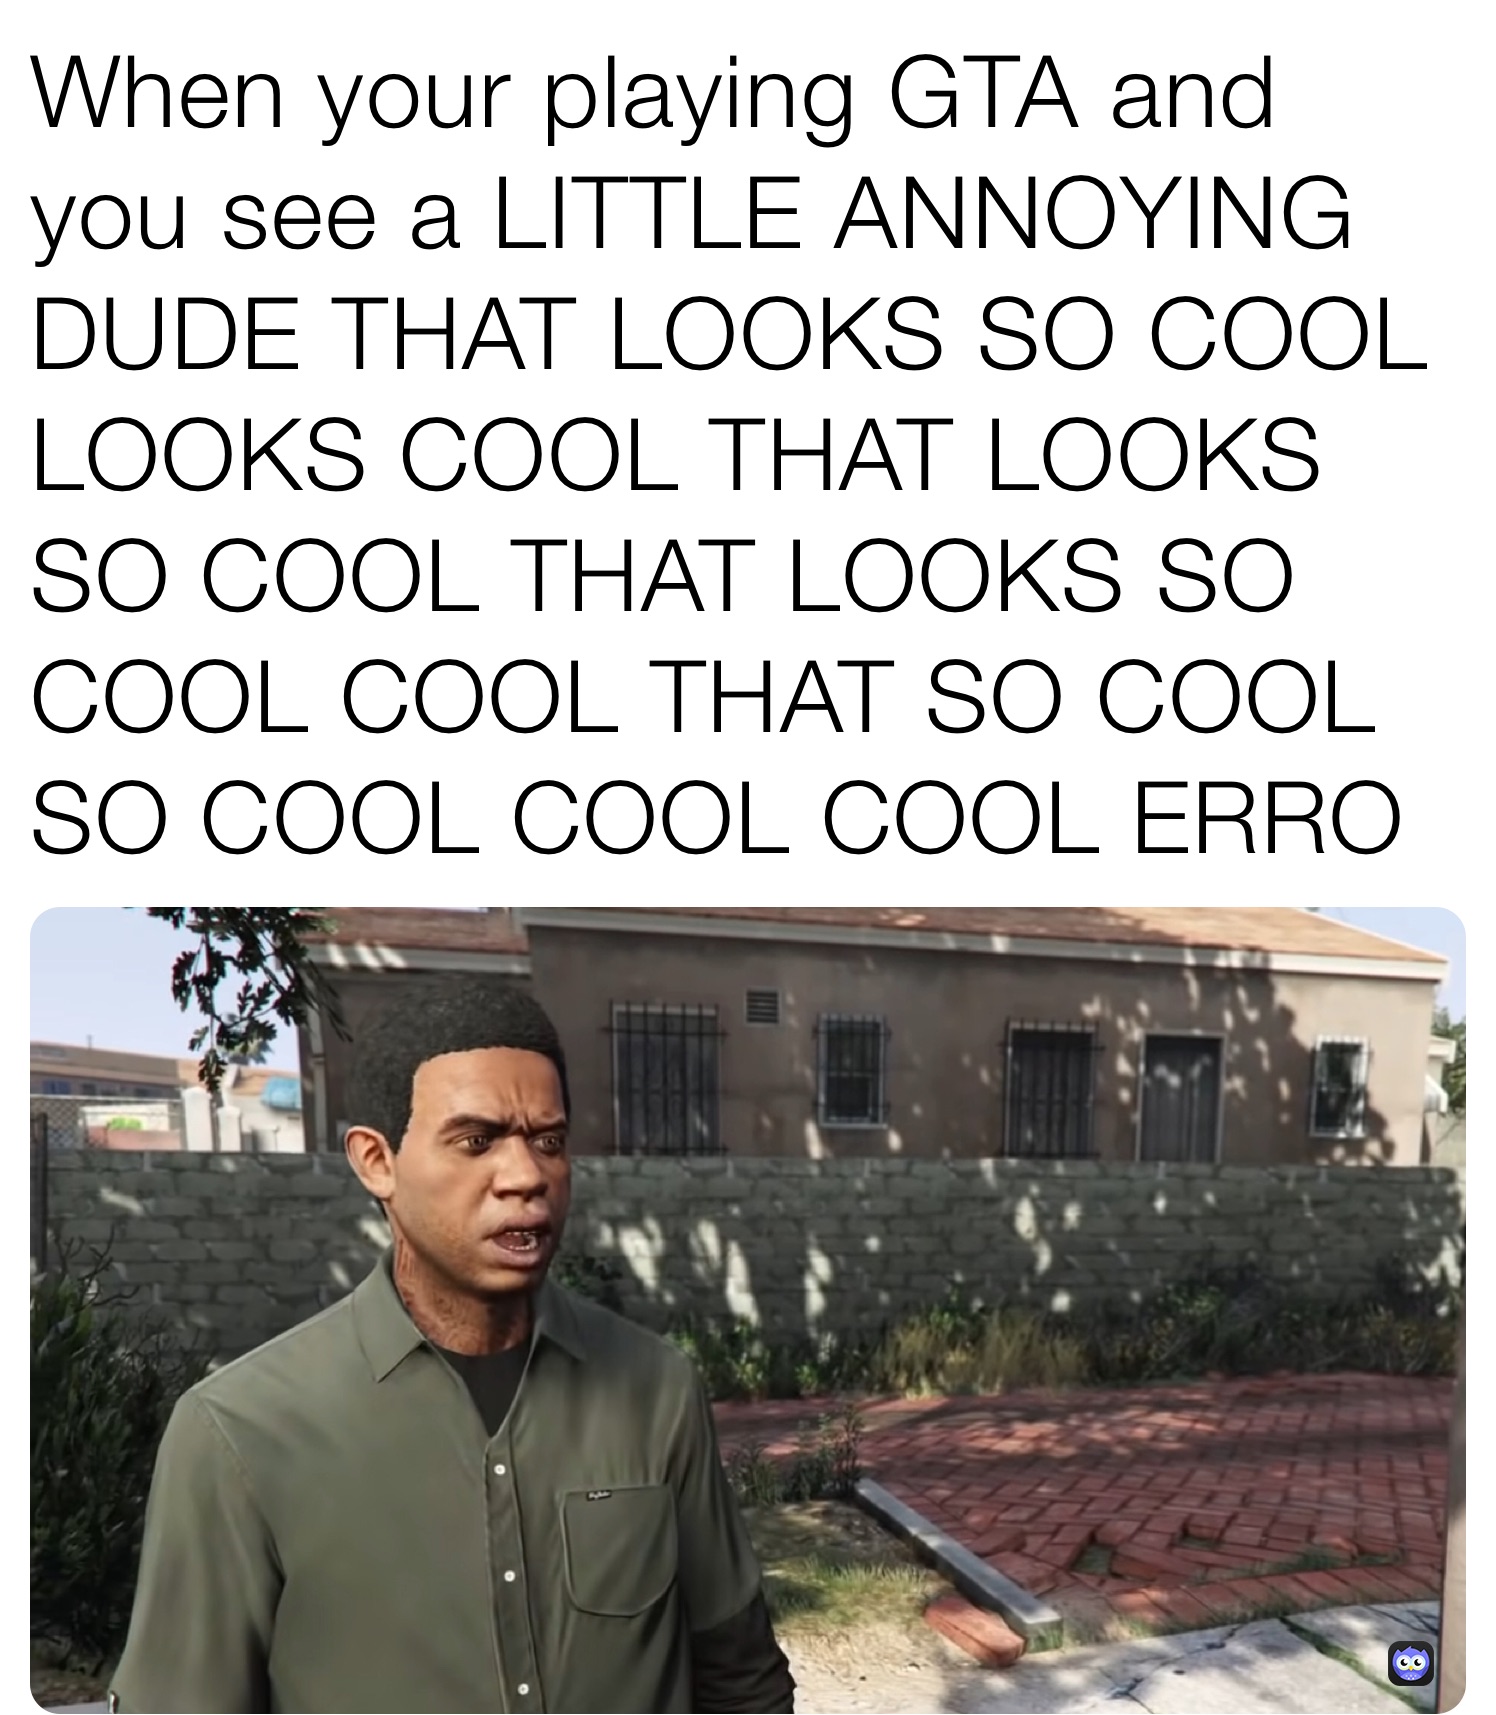 When your playing GTA and you see a LITTLE ANNOYING DUDE THAT LOOKS SO COOL LOOKS COOL THAT LOOKS SO COOL THAT LOOKS SO COOL COOL THAT SO COOL SO COOL COOL COOL ERRO